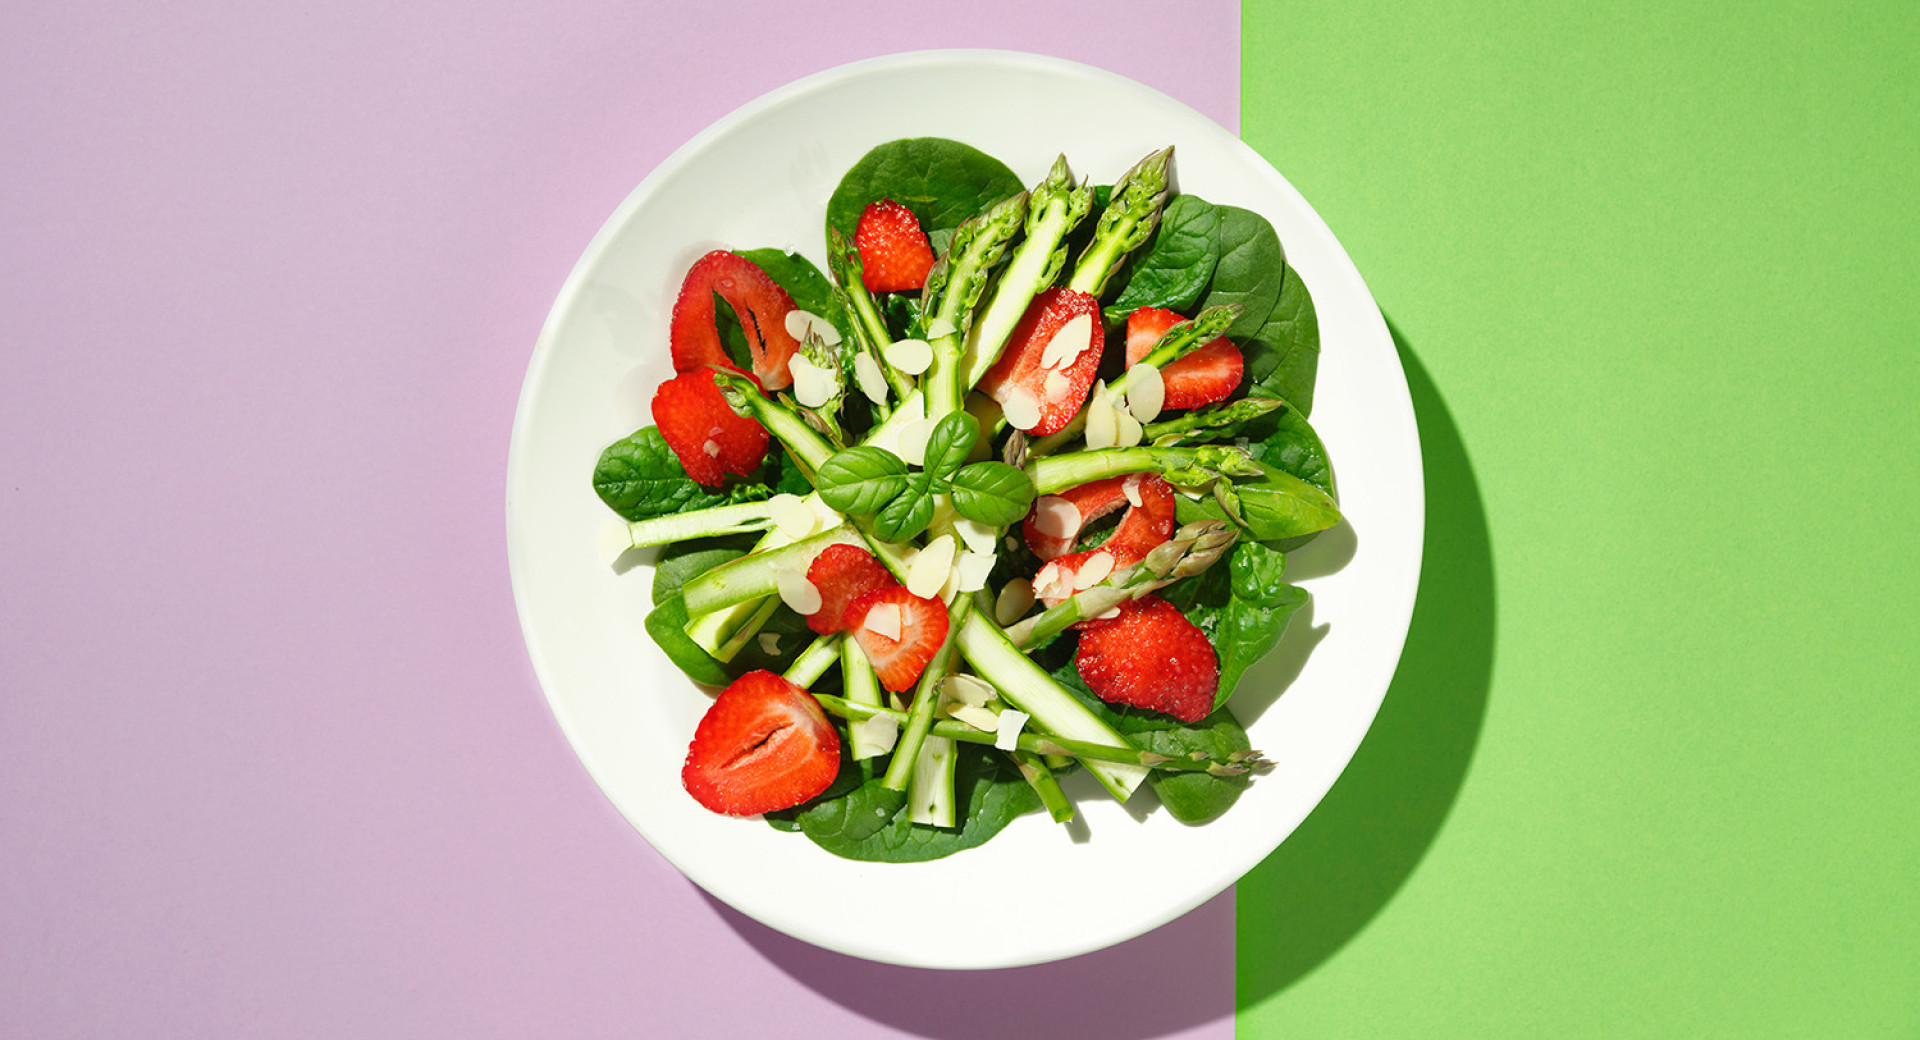 A white plate on a pink and green base. On the plate, neatly arranged salad of asparagus and strawberries.